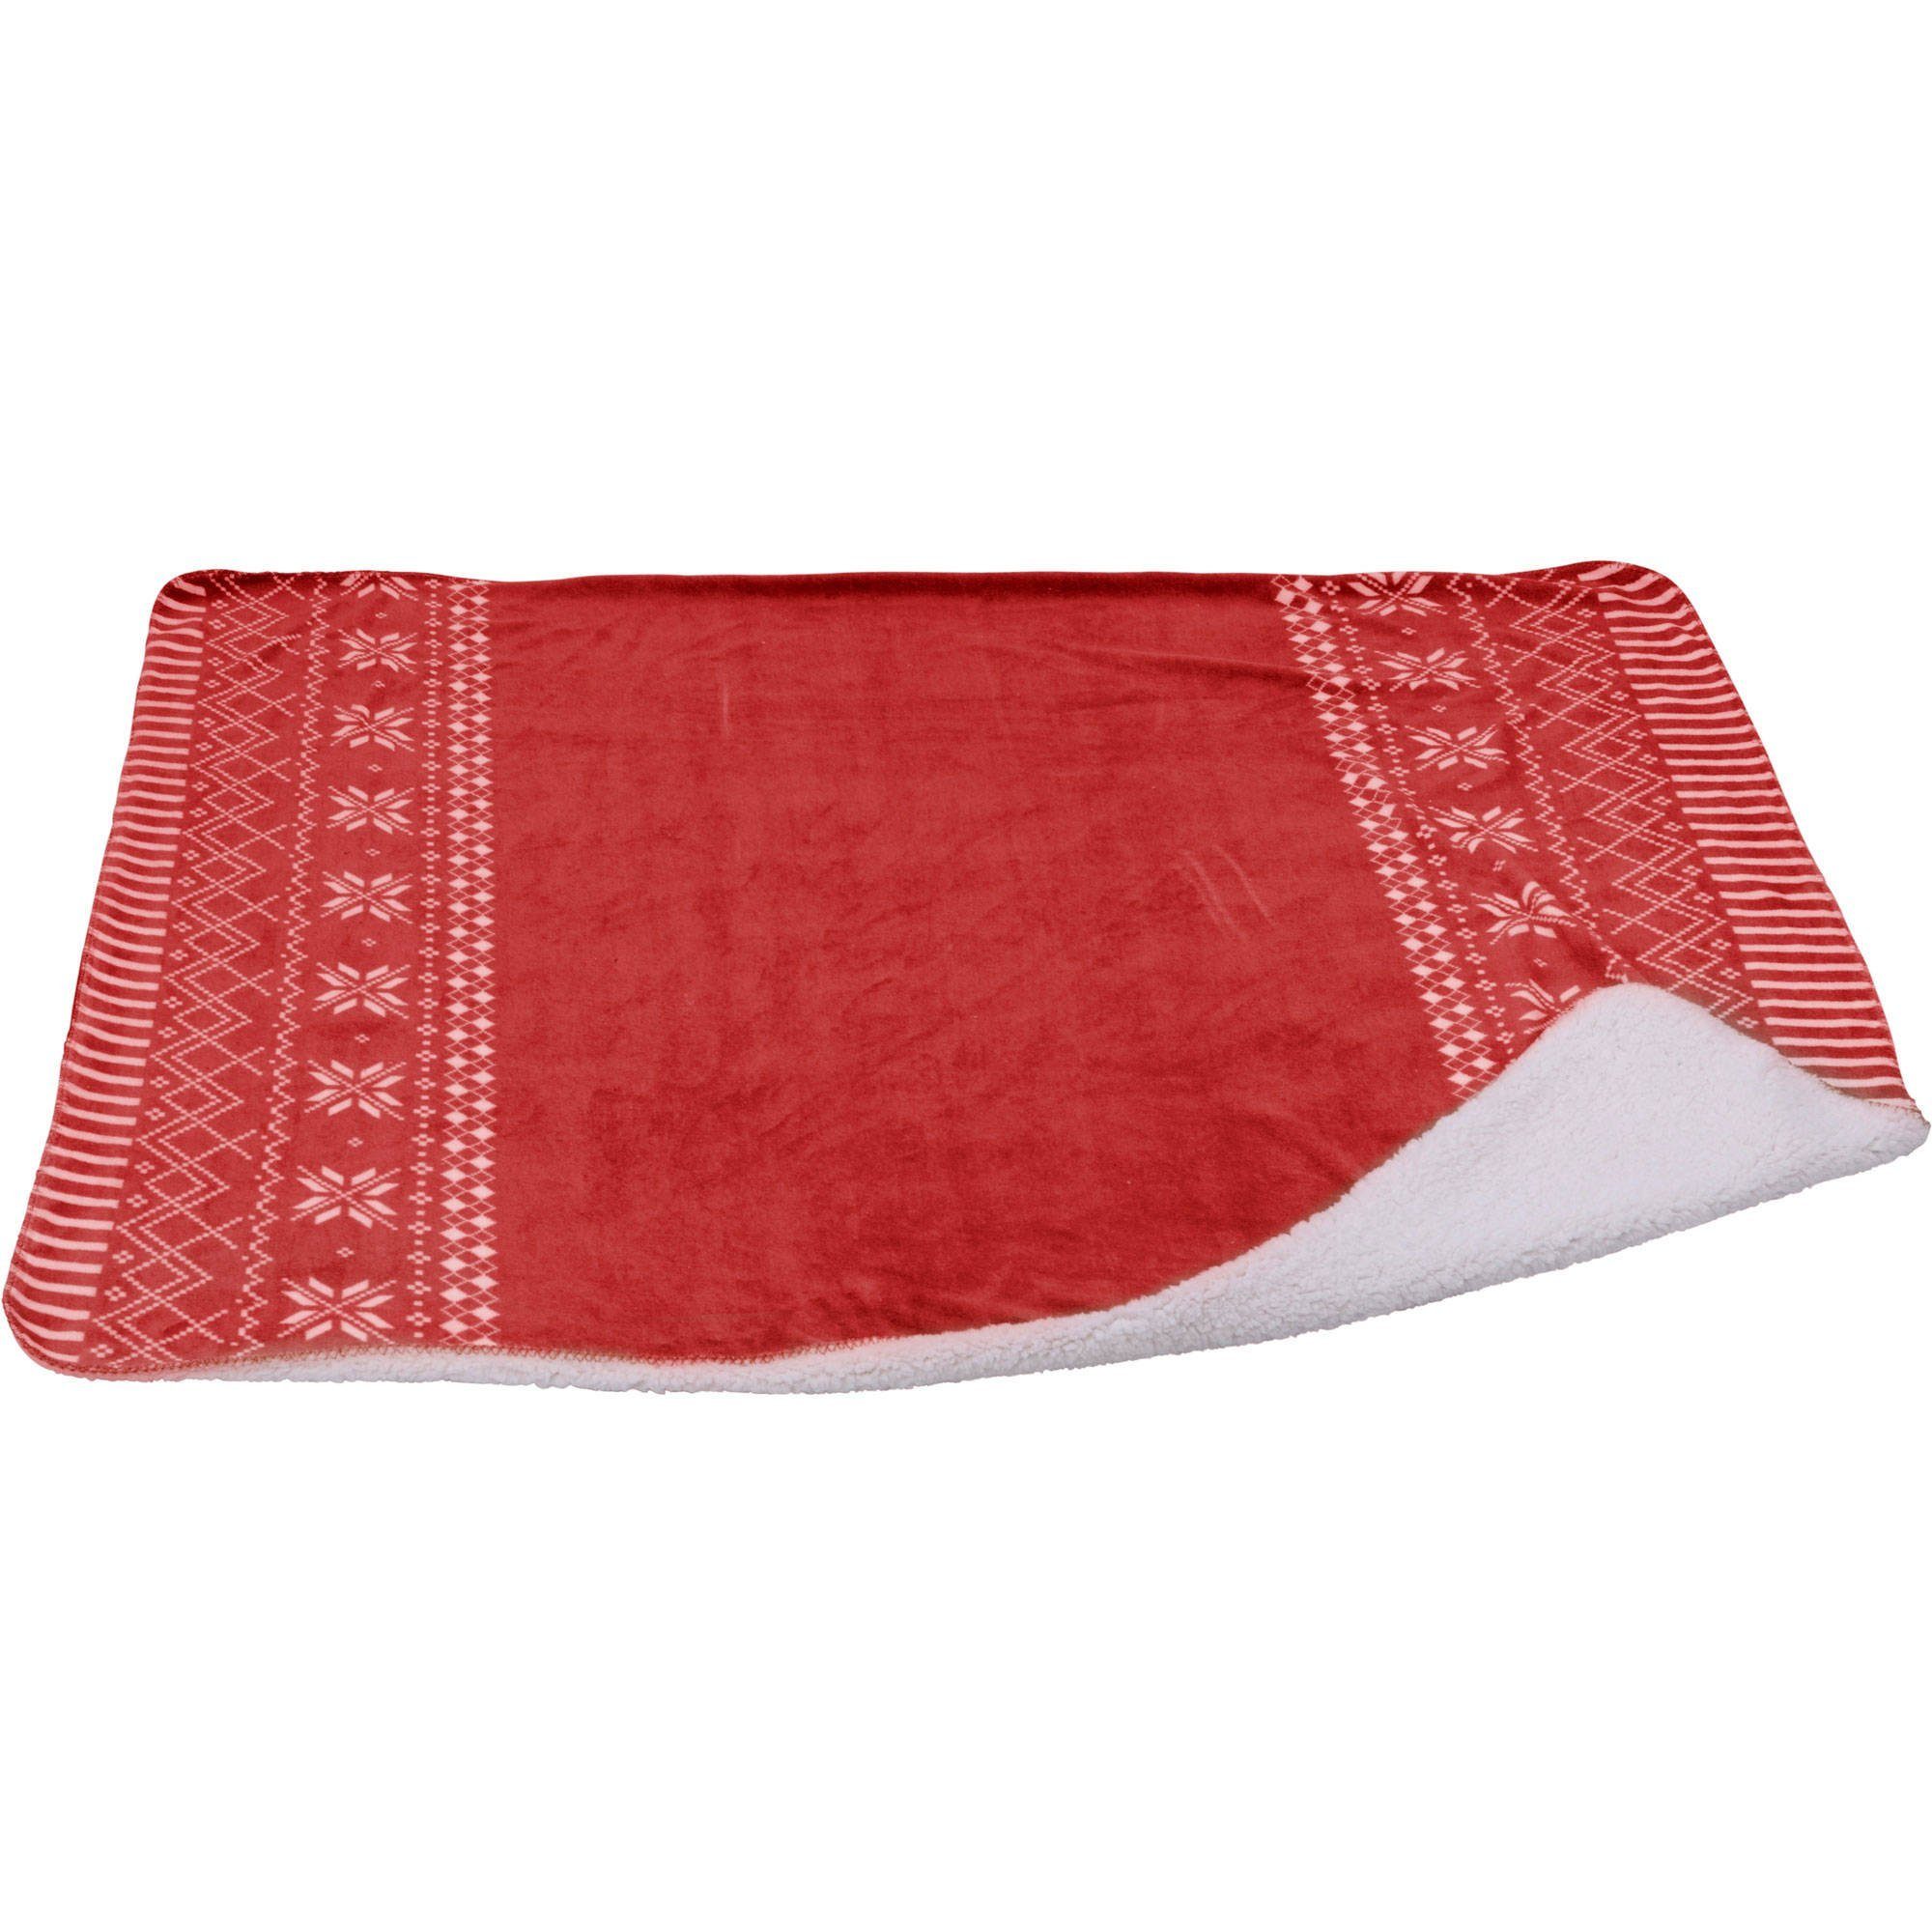 Tagesdecke, Home & styling collection Rot